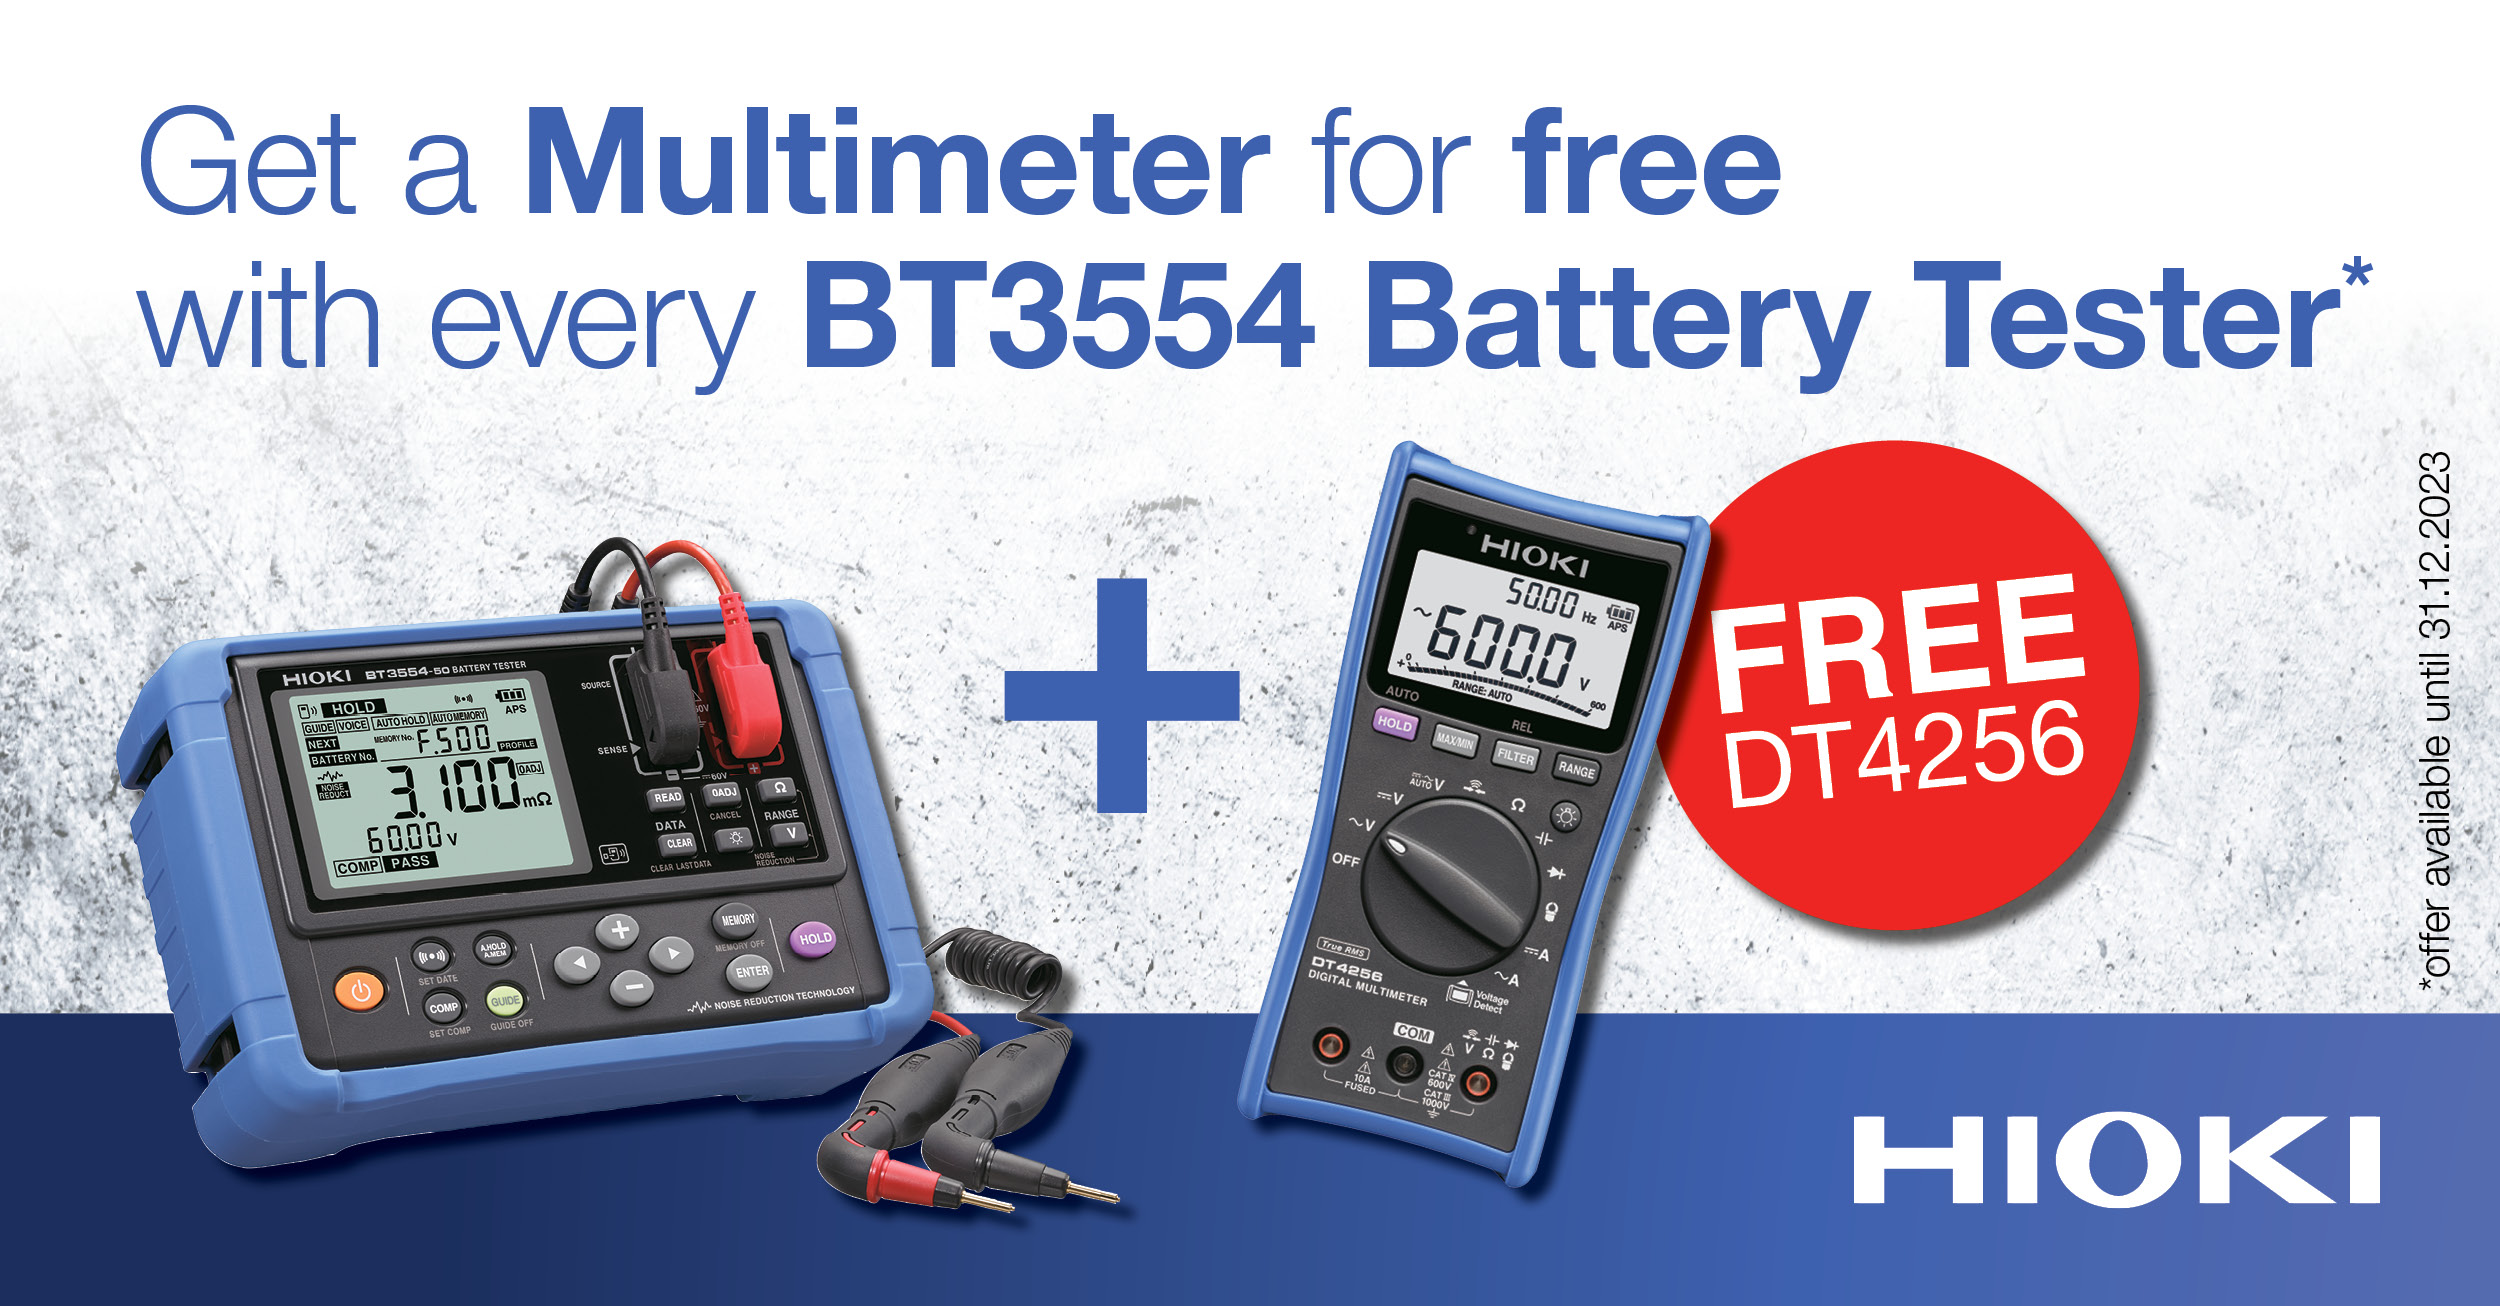 BT3554 Battery Tester + FREE DT4256 Multimeter promotion - for a limited time only